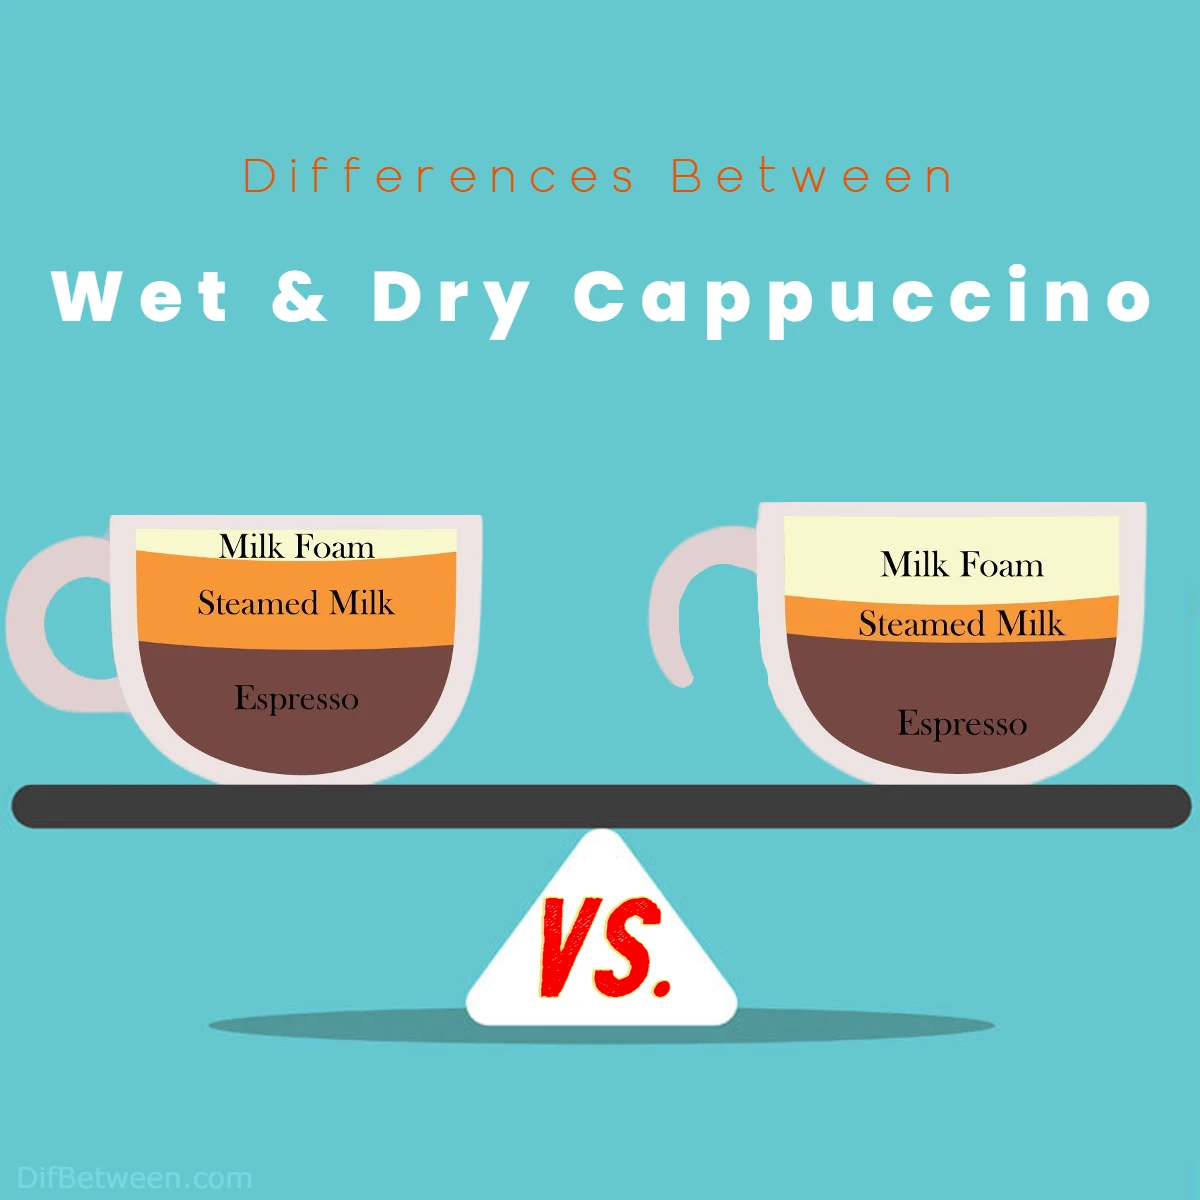 Differences Between Dry and Wet Cappuccino